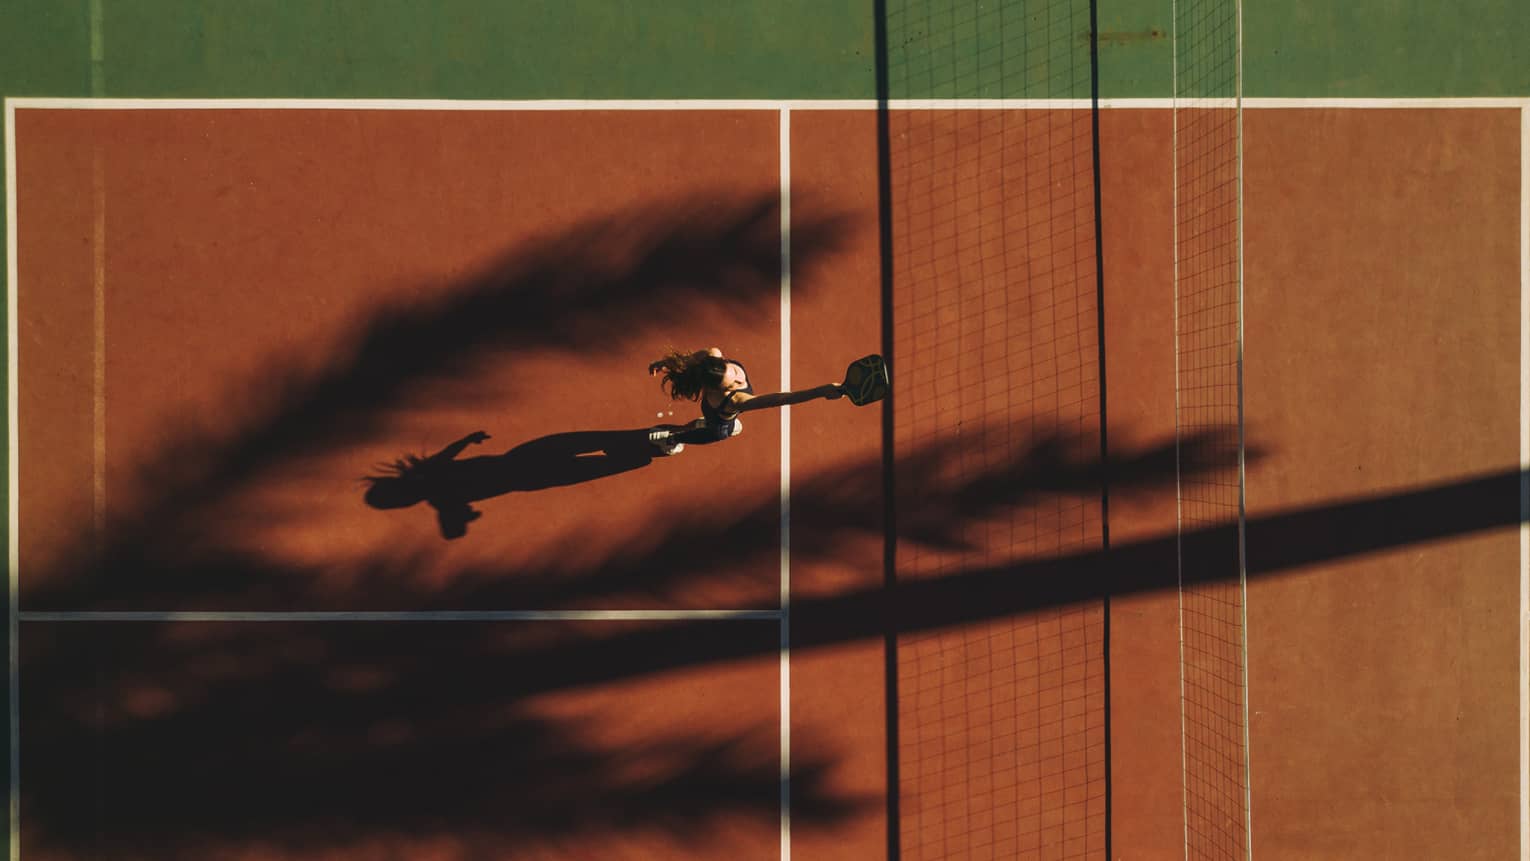 A palm tree casts a shadow on a terracotta-coloured pickleball court as a player stands behind the kitchen, paddle up high.